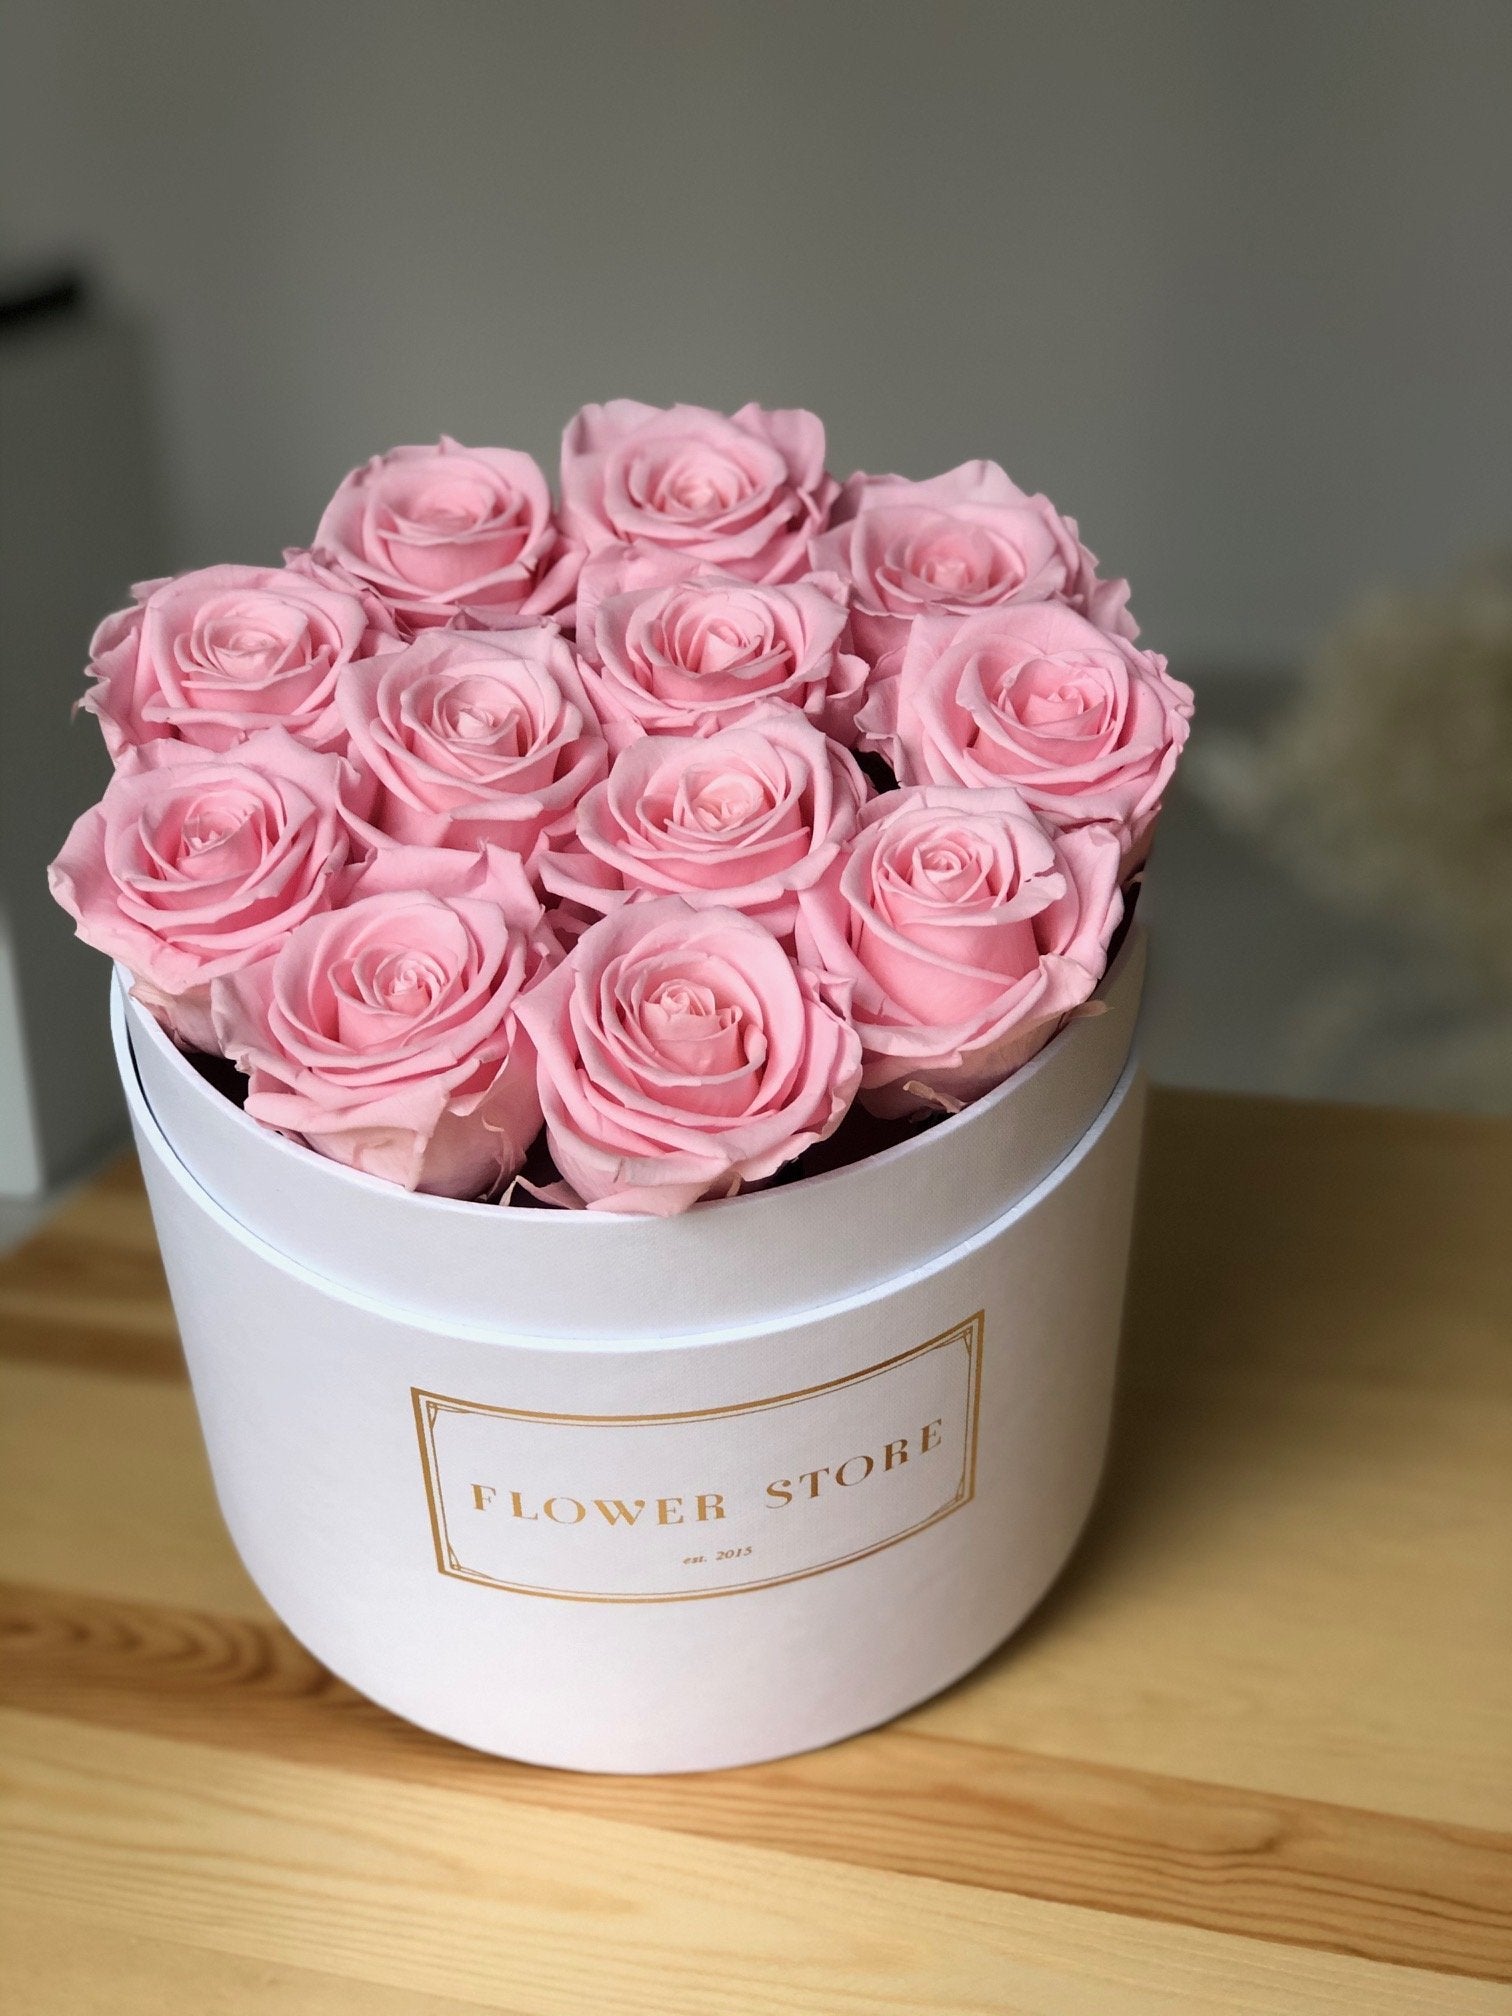 Flowerbox white with pink eternal roses